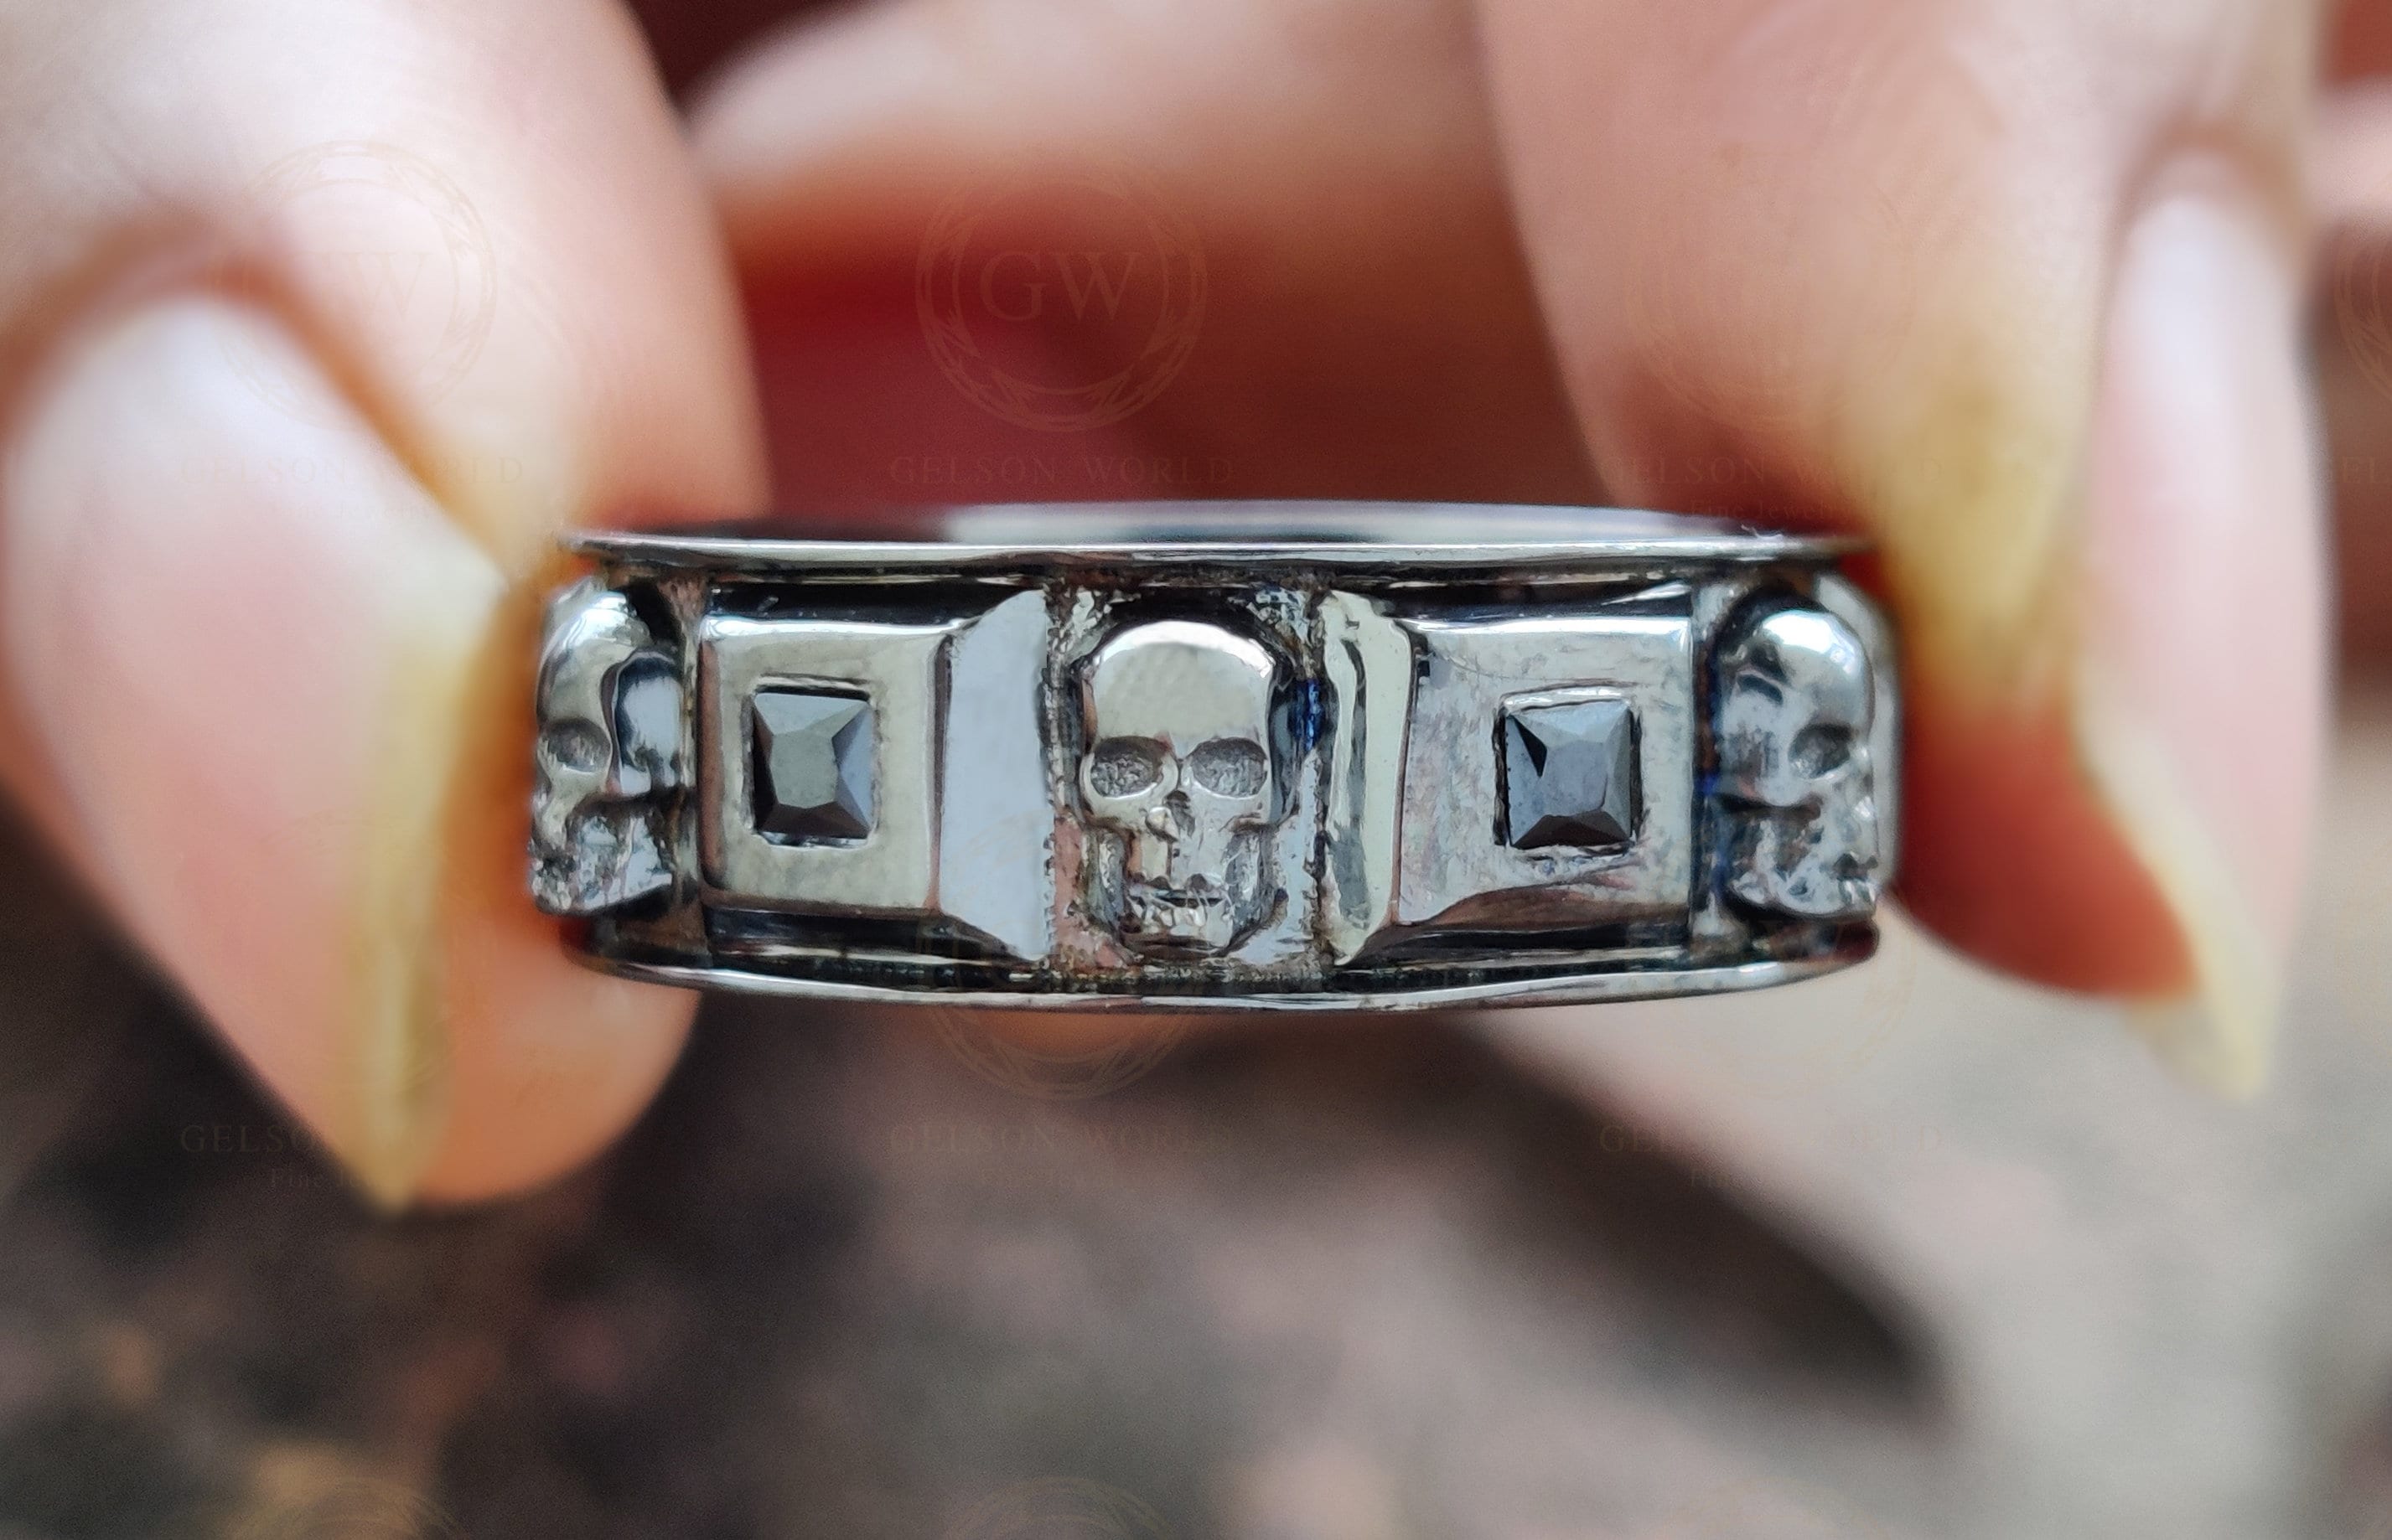 7 mm Wide Men's Gothic Skull Wedding Band, Punk Style Biker Ring, Unique Jewelry, Black CZ Sterling silver, Anniversary Ring, Eternity Band